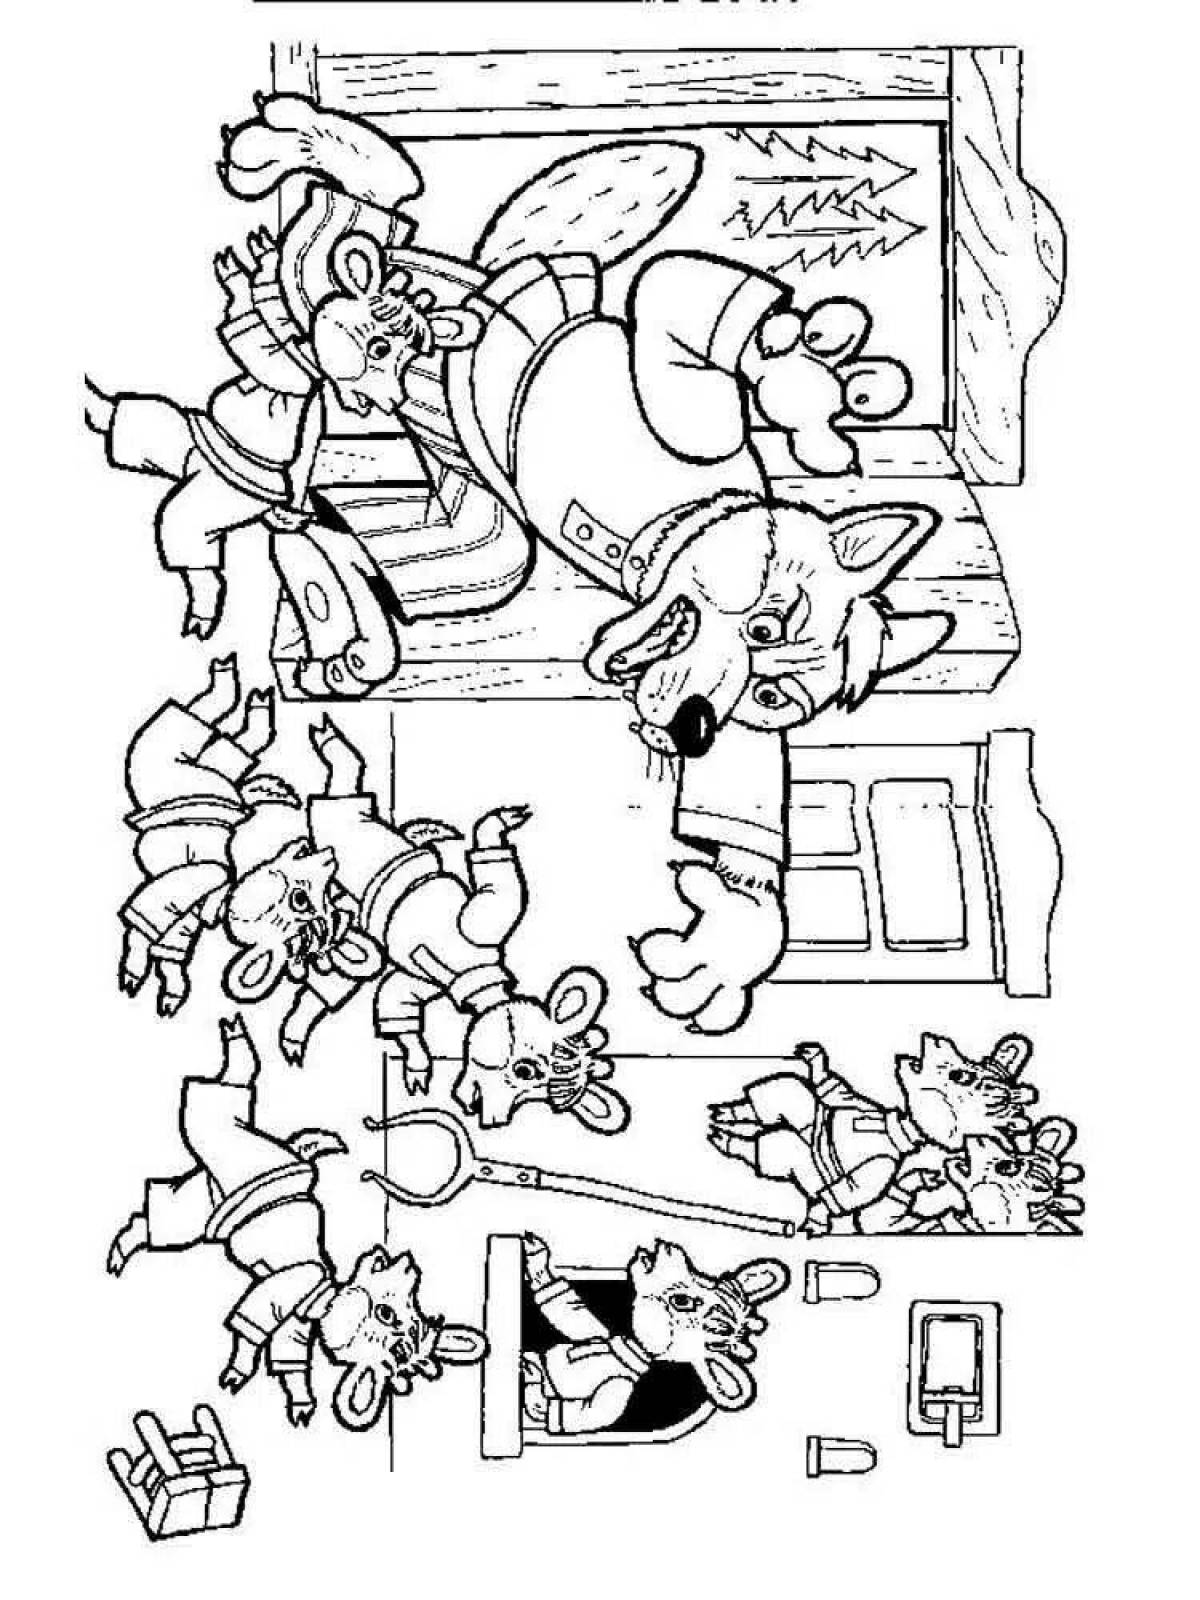 Comic wolf and seven children coloring pages